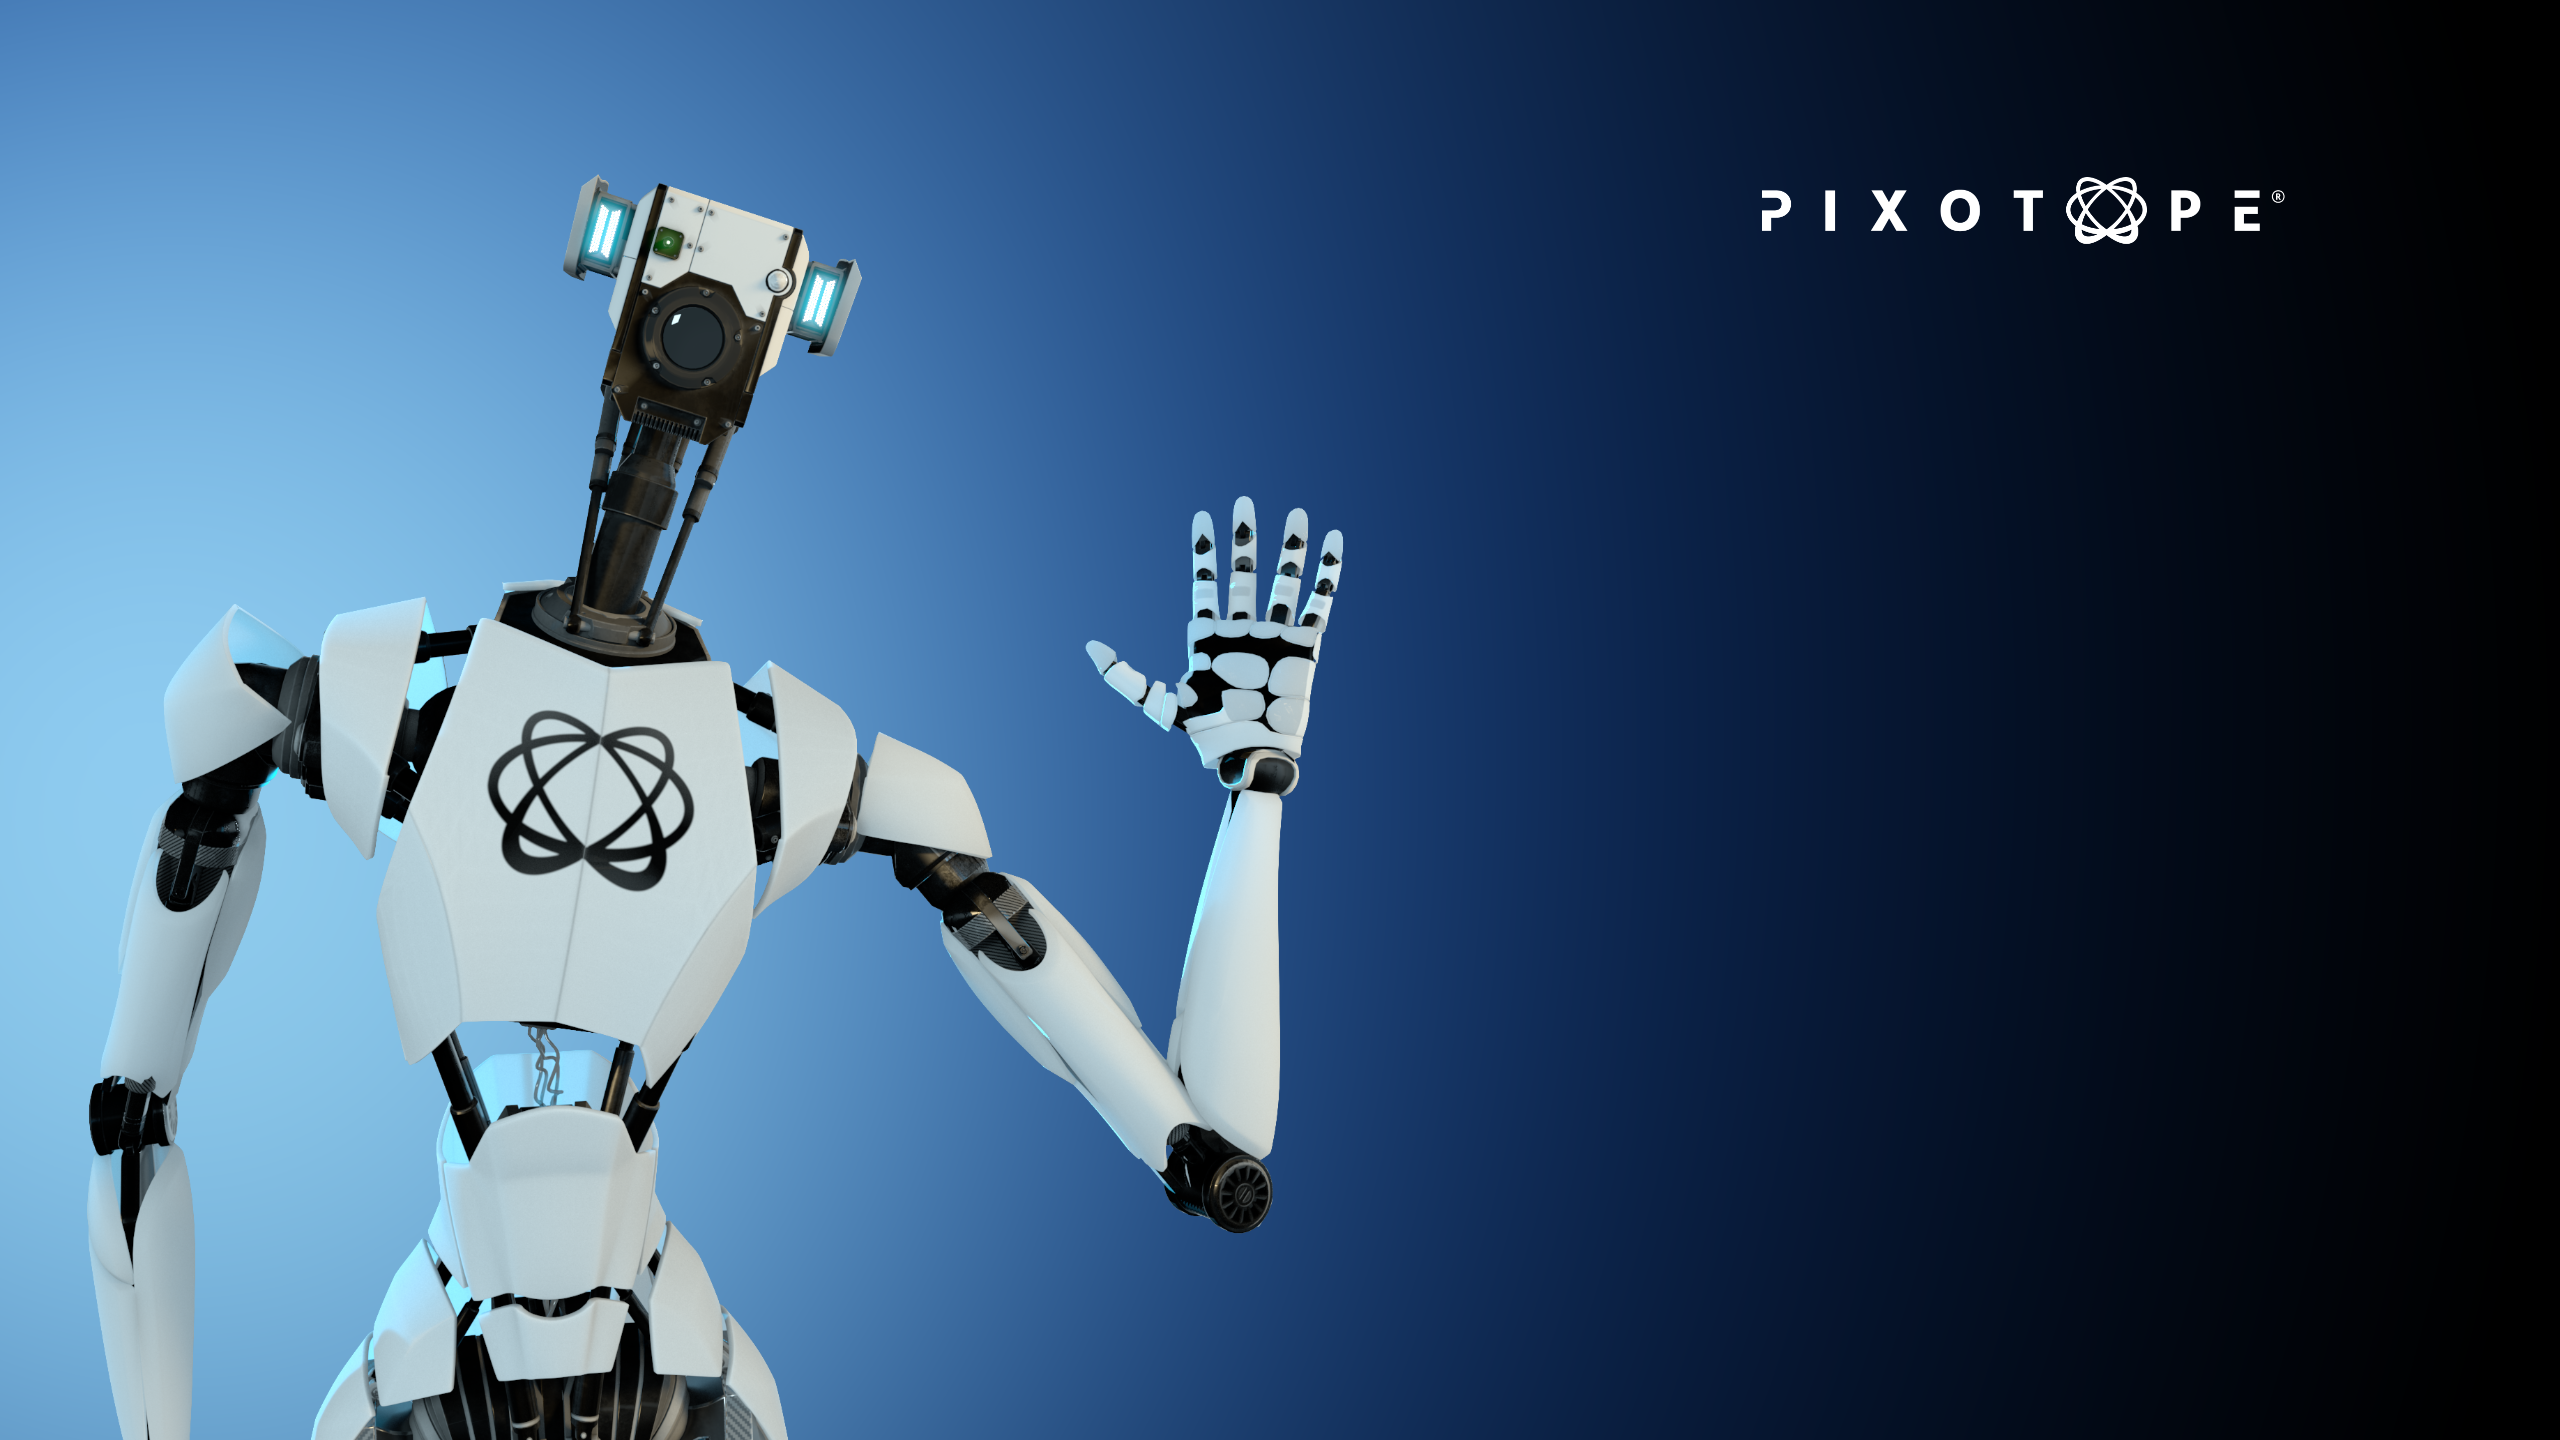 White humanoid with Pixotope logo on chest waving